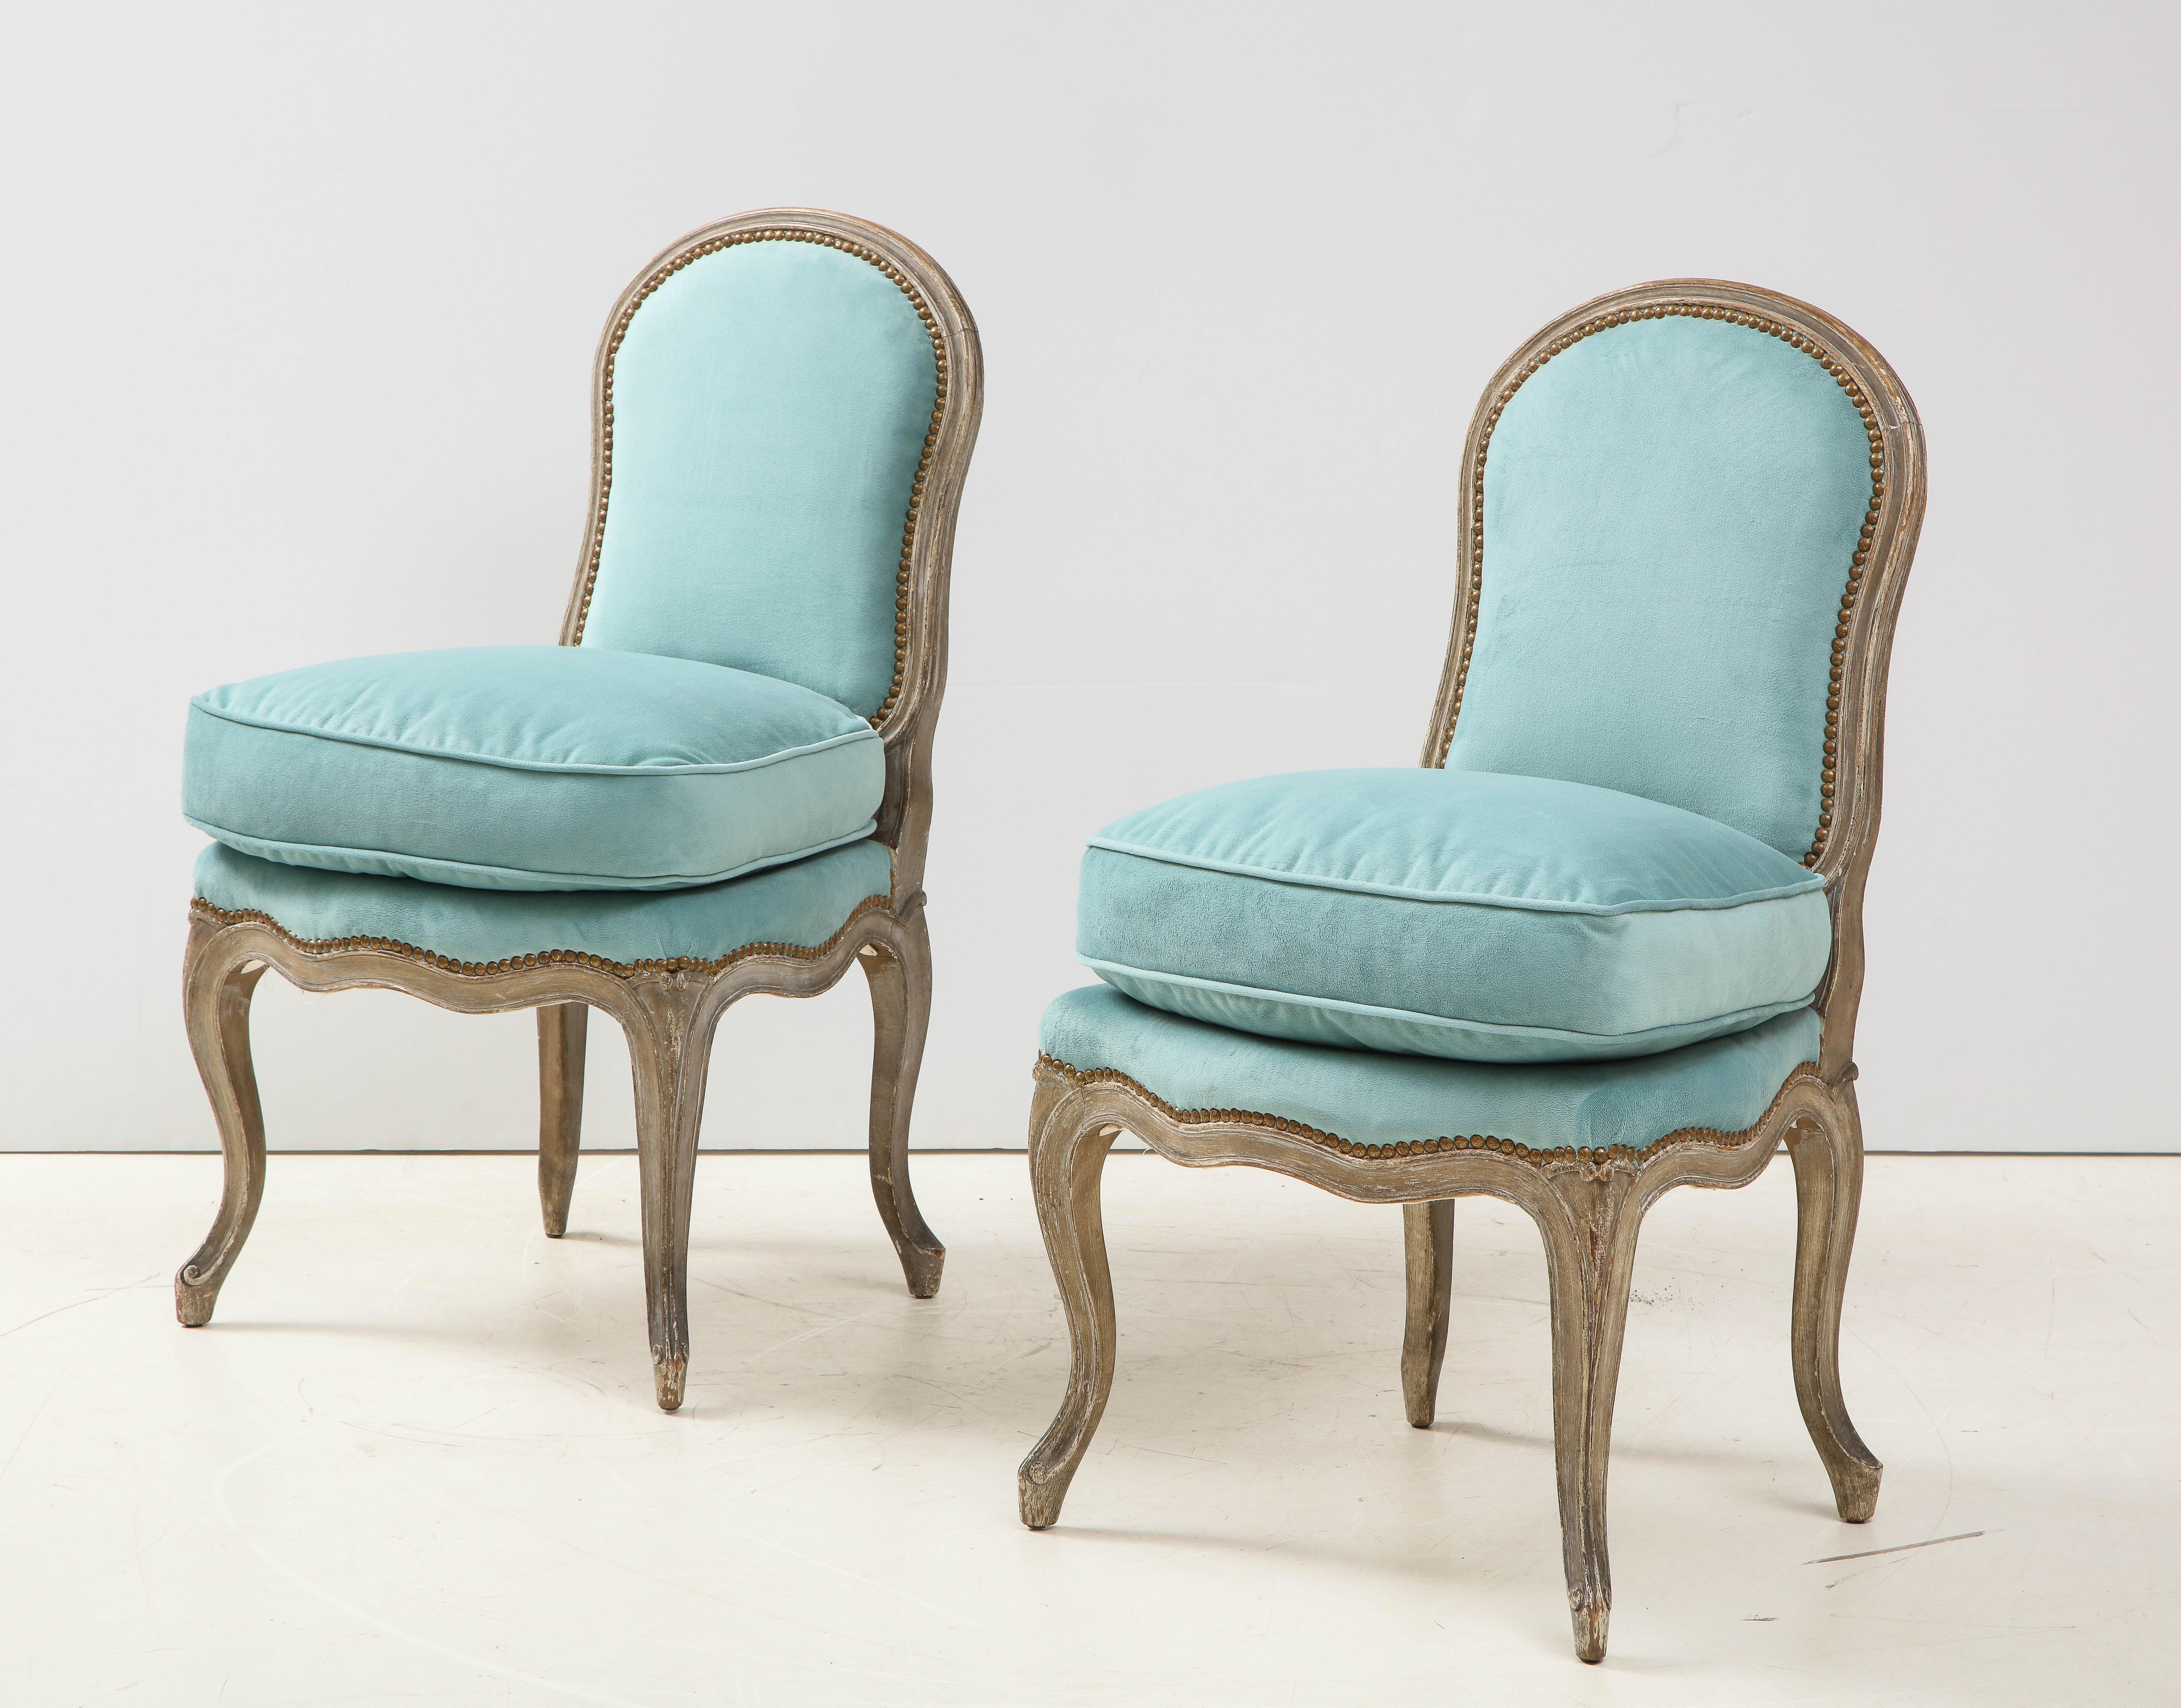 A charming pair of Louis XV style slipper chairs with a painted finish, a tight back and loose seat cushion, trimmed in nail heads. Upholstered in a lovely blue, this duo would be perfect as extra seating in living room or accent chairs in a bedroom